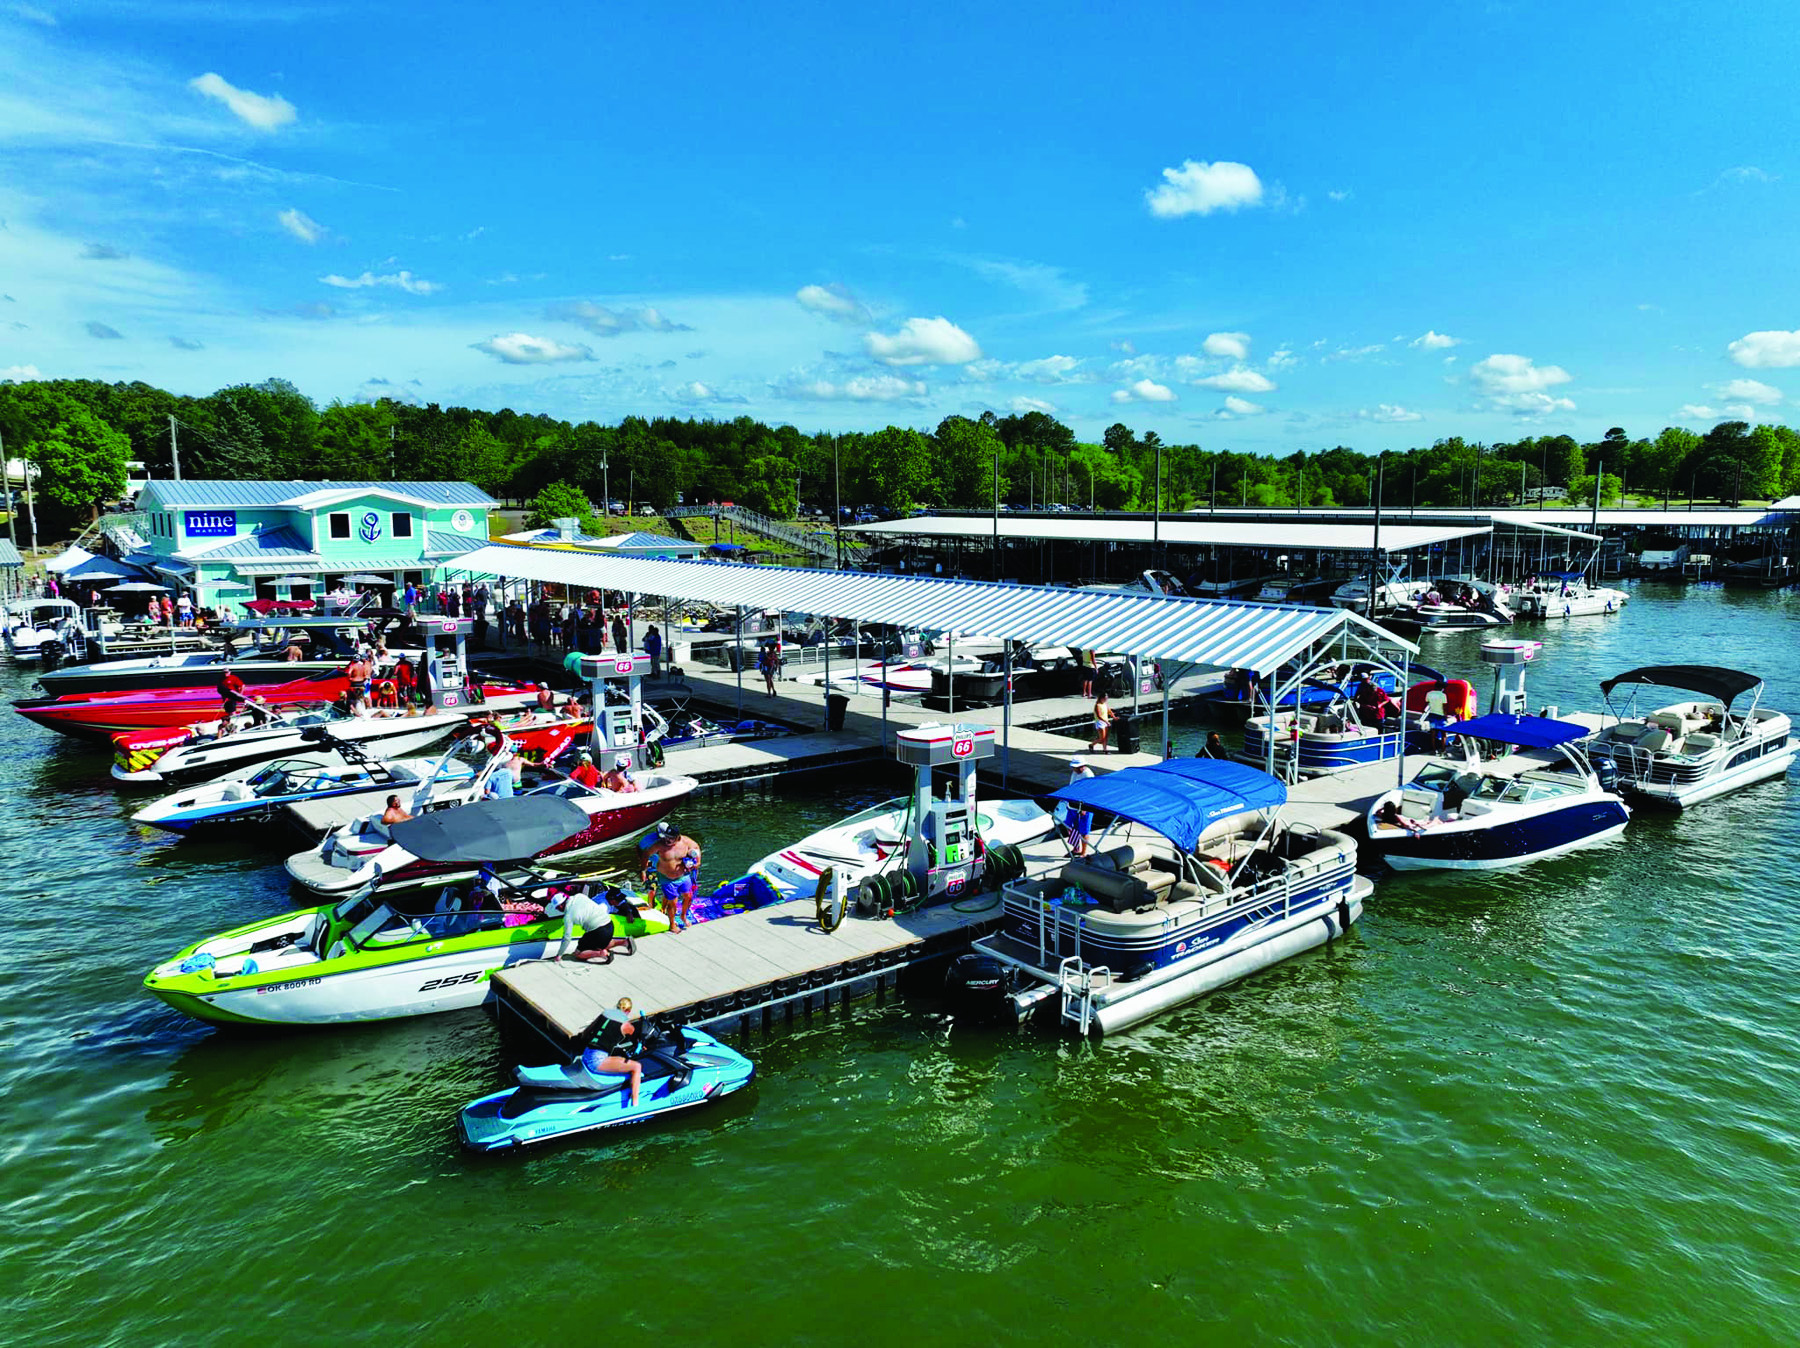 The lake was buzzing with all of the boaters who were vying for the big hand during the Lake